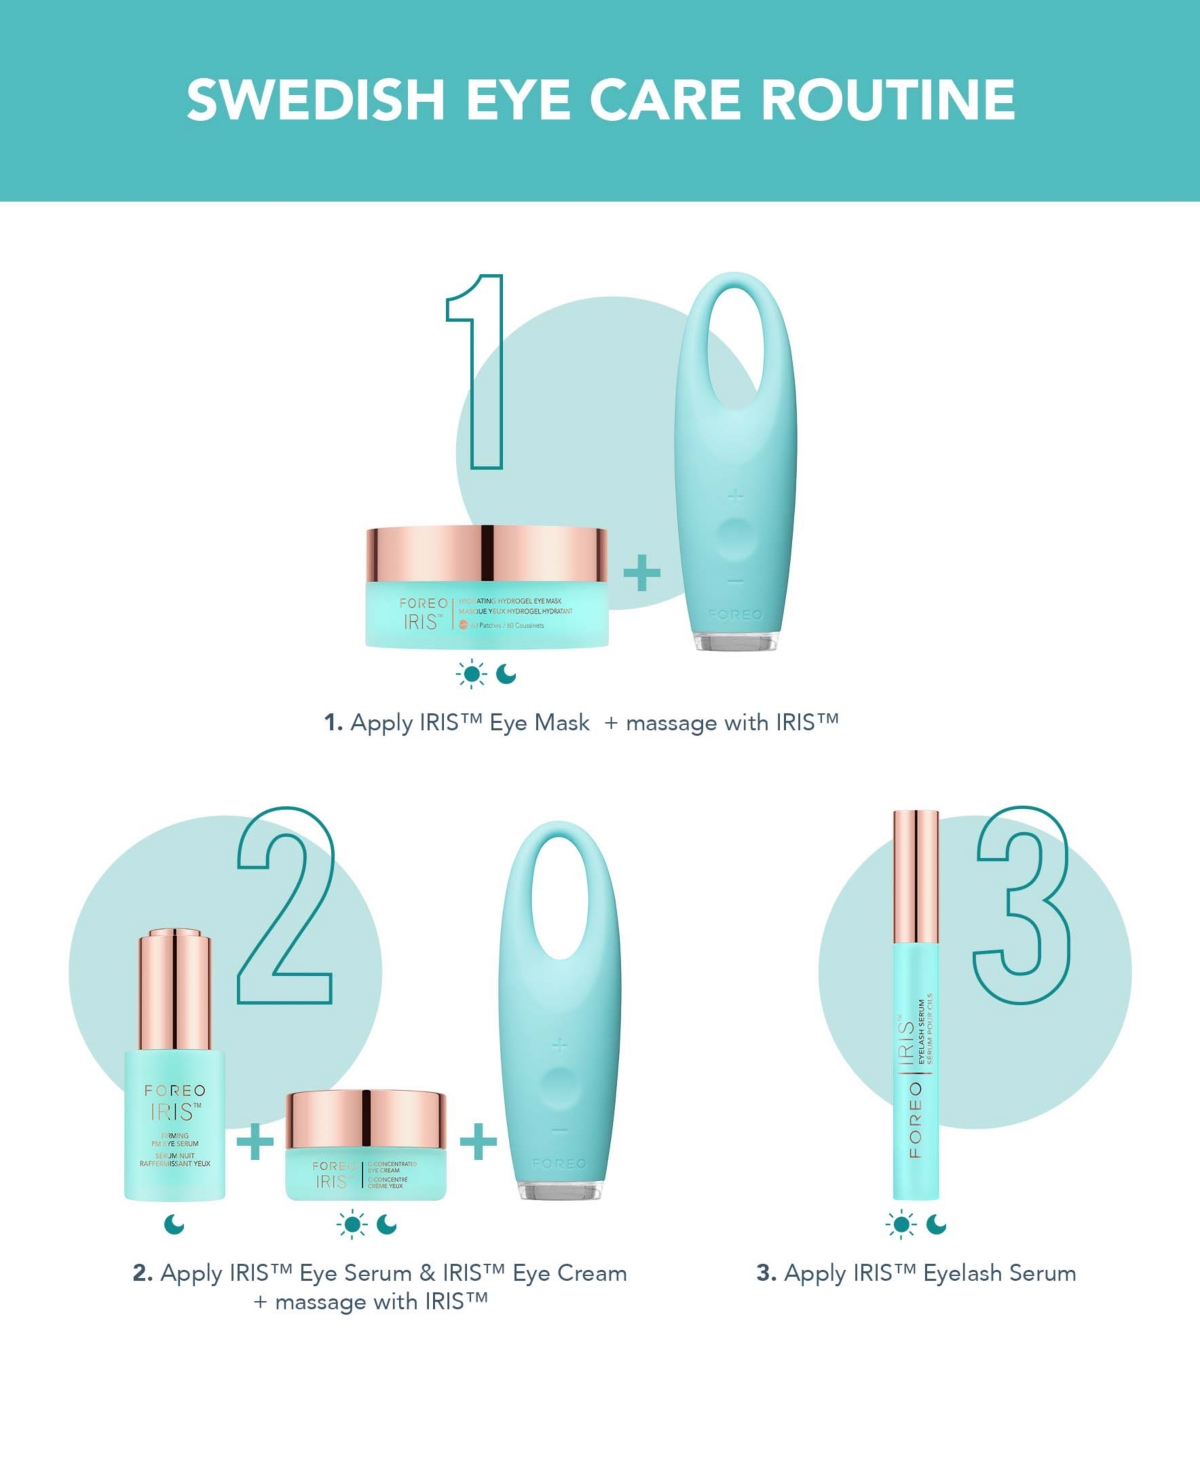 Shop Foreo Iris Firming Pm Eye Serum, 15 ml In No Color